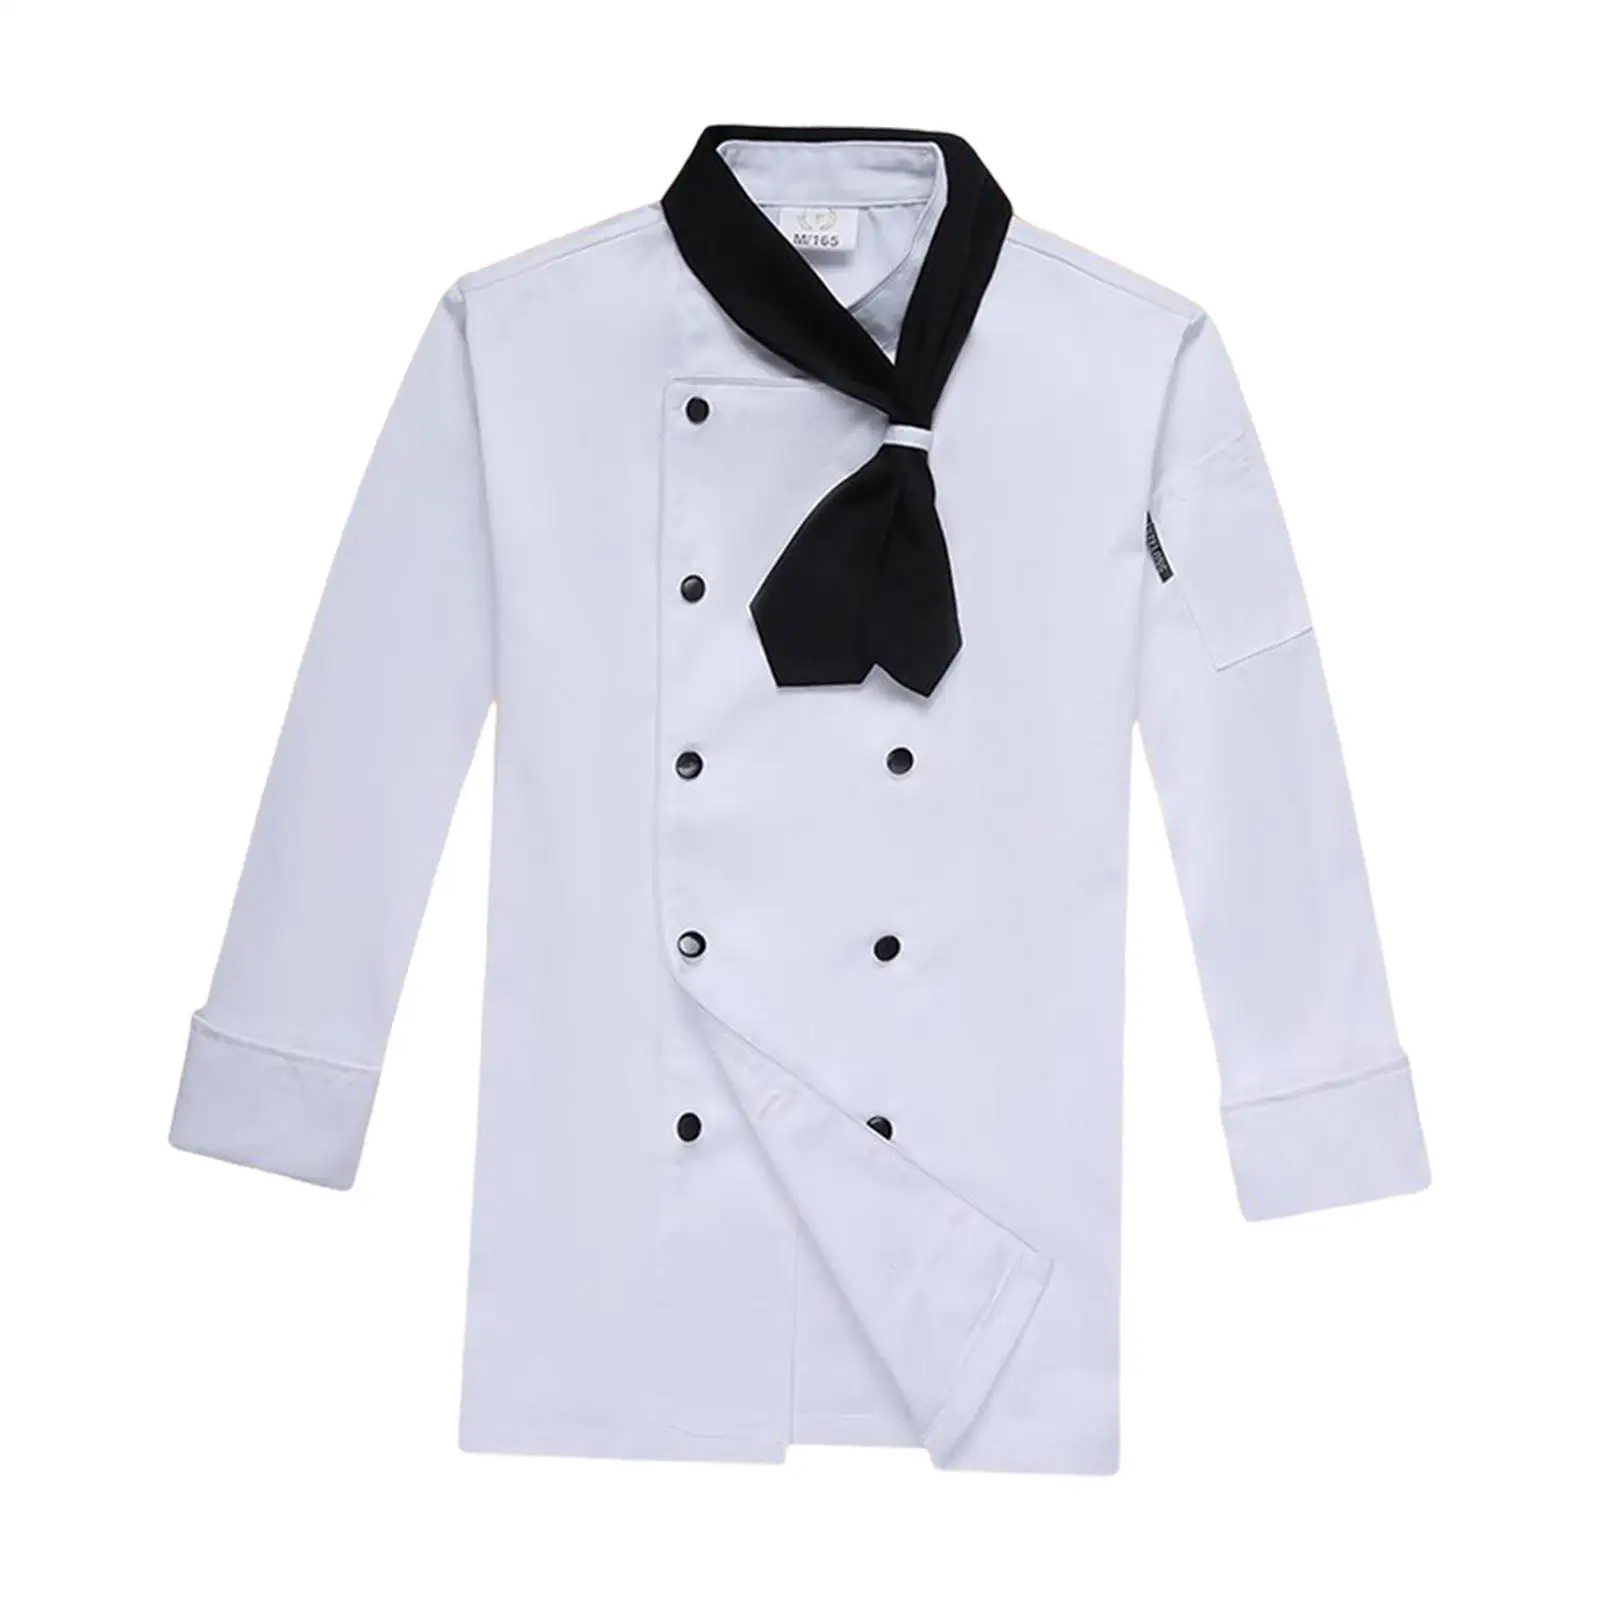 Long Sleeve Chef Jackets Chef Clothing Unisex Apparels Cook Clothes uniform Chef Coat for Hotel cafe Industry